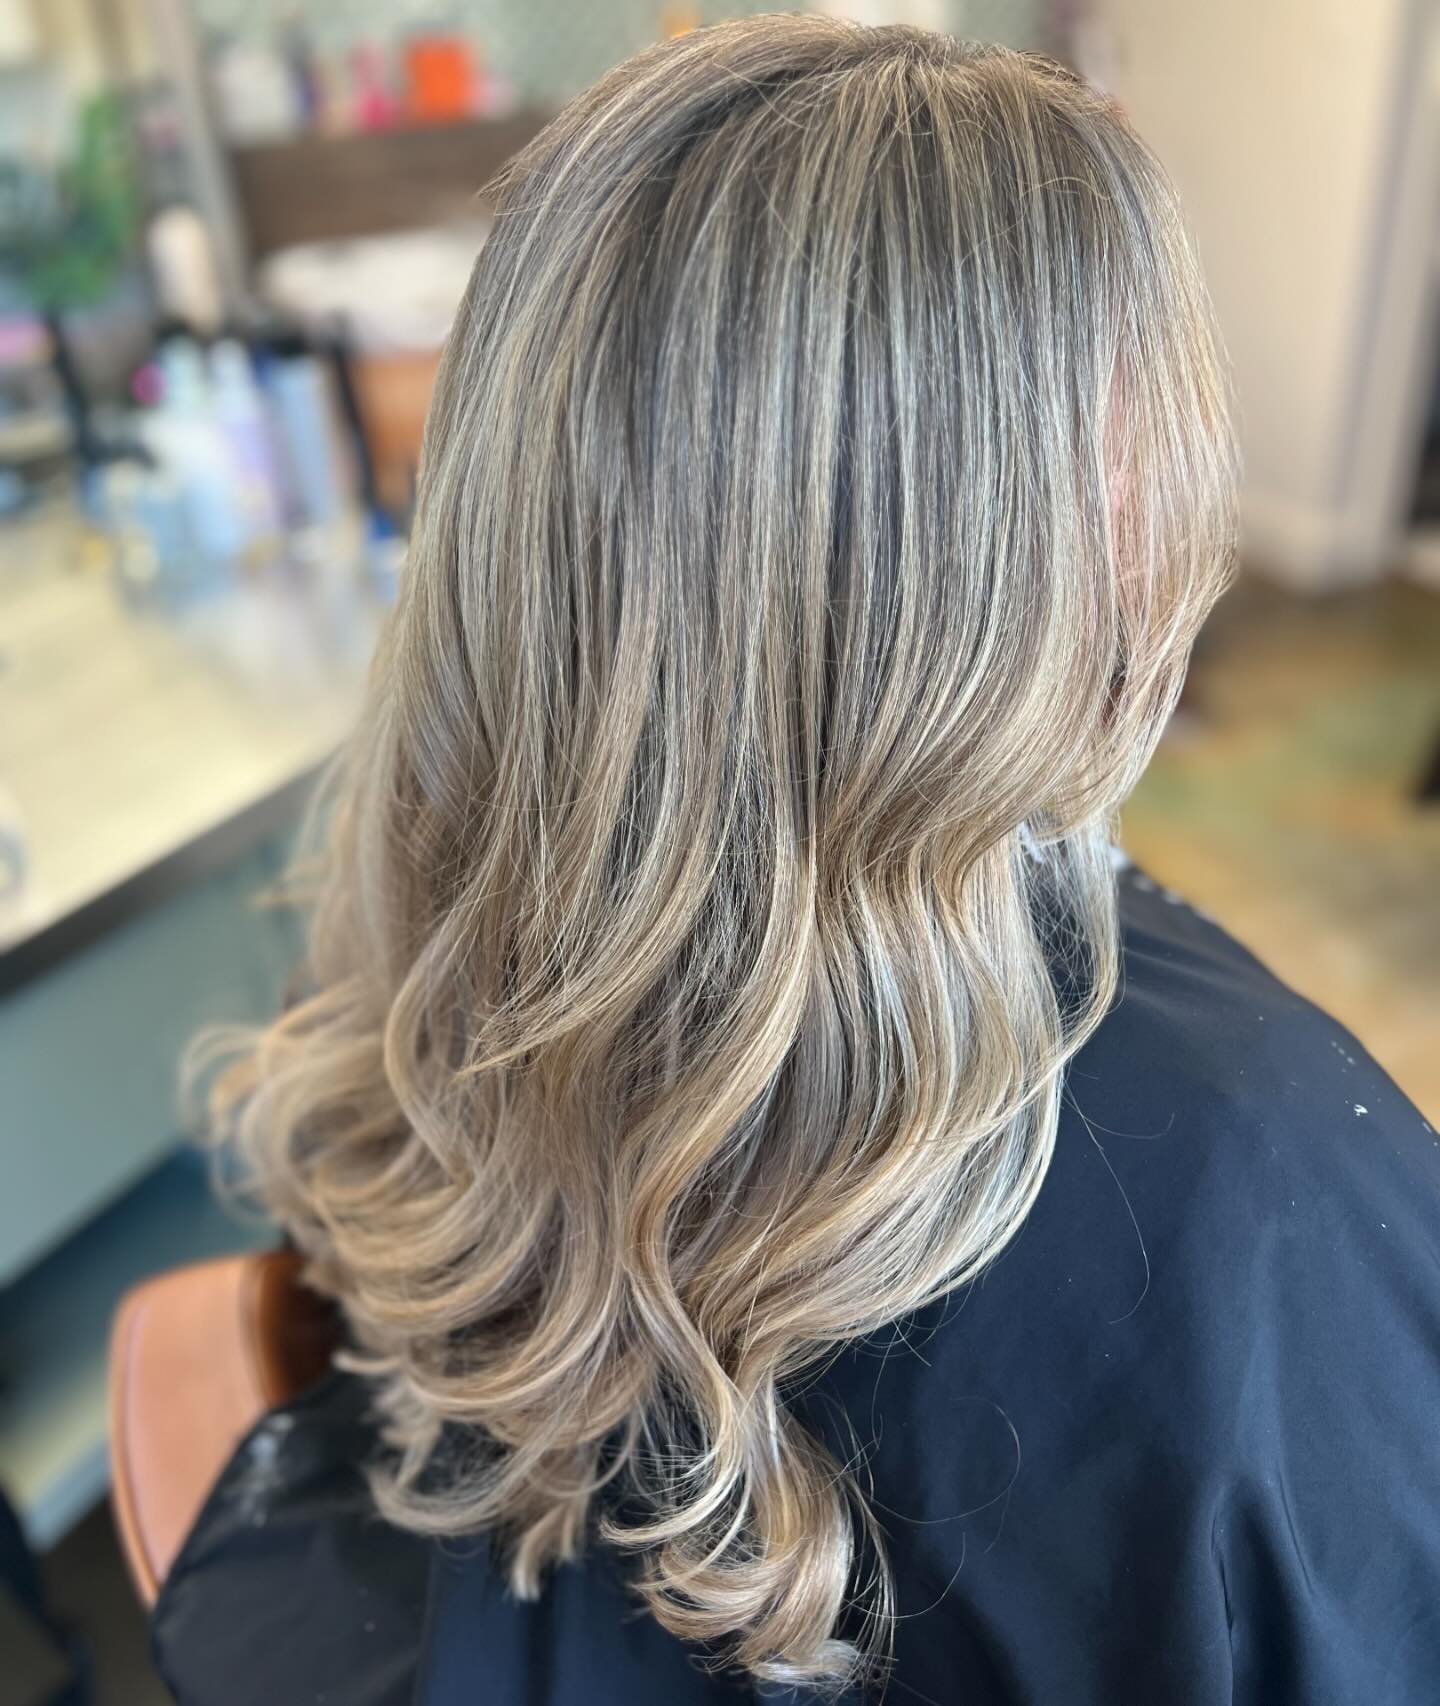 a little spring tune up 🫶

Last Appt: November 

Transformational custom foiling + haircut 

@evopro bottle blonde for the lift 💪🏼
Styled using @shibui.hair 🤩

#downtownrochester #rochesterhills #michiganhairsalon #sustainablebeauty #nomadbeauty 